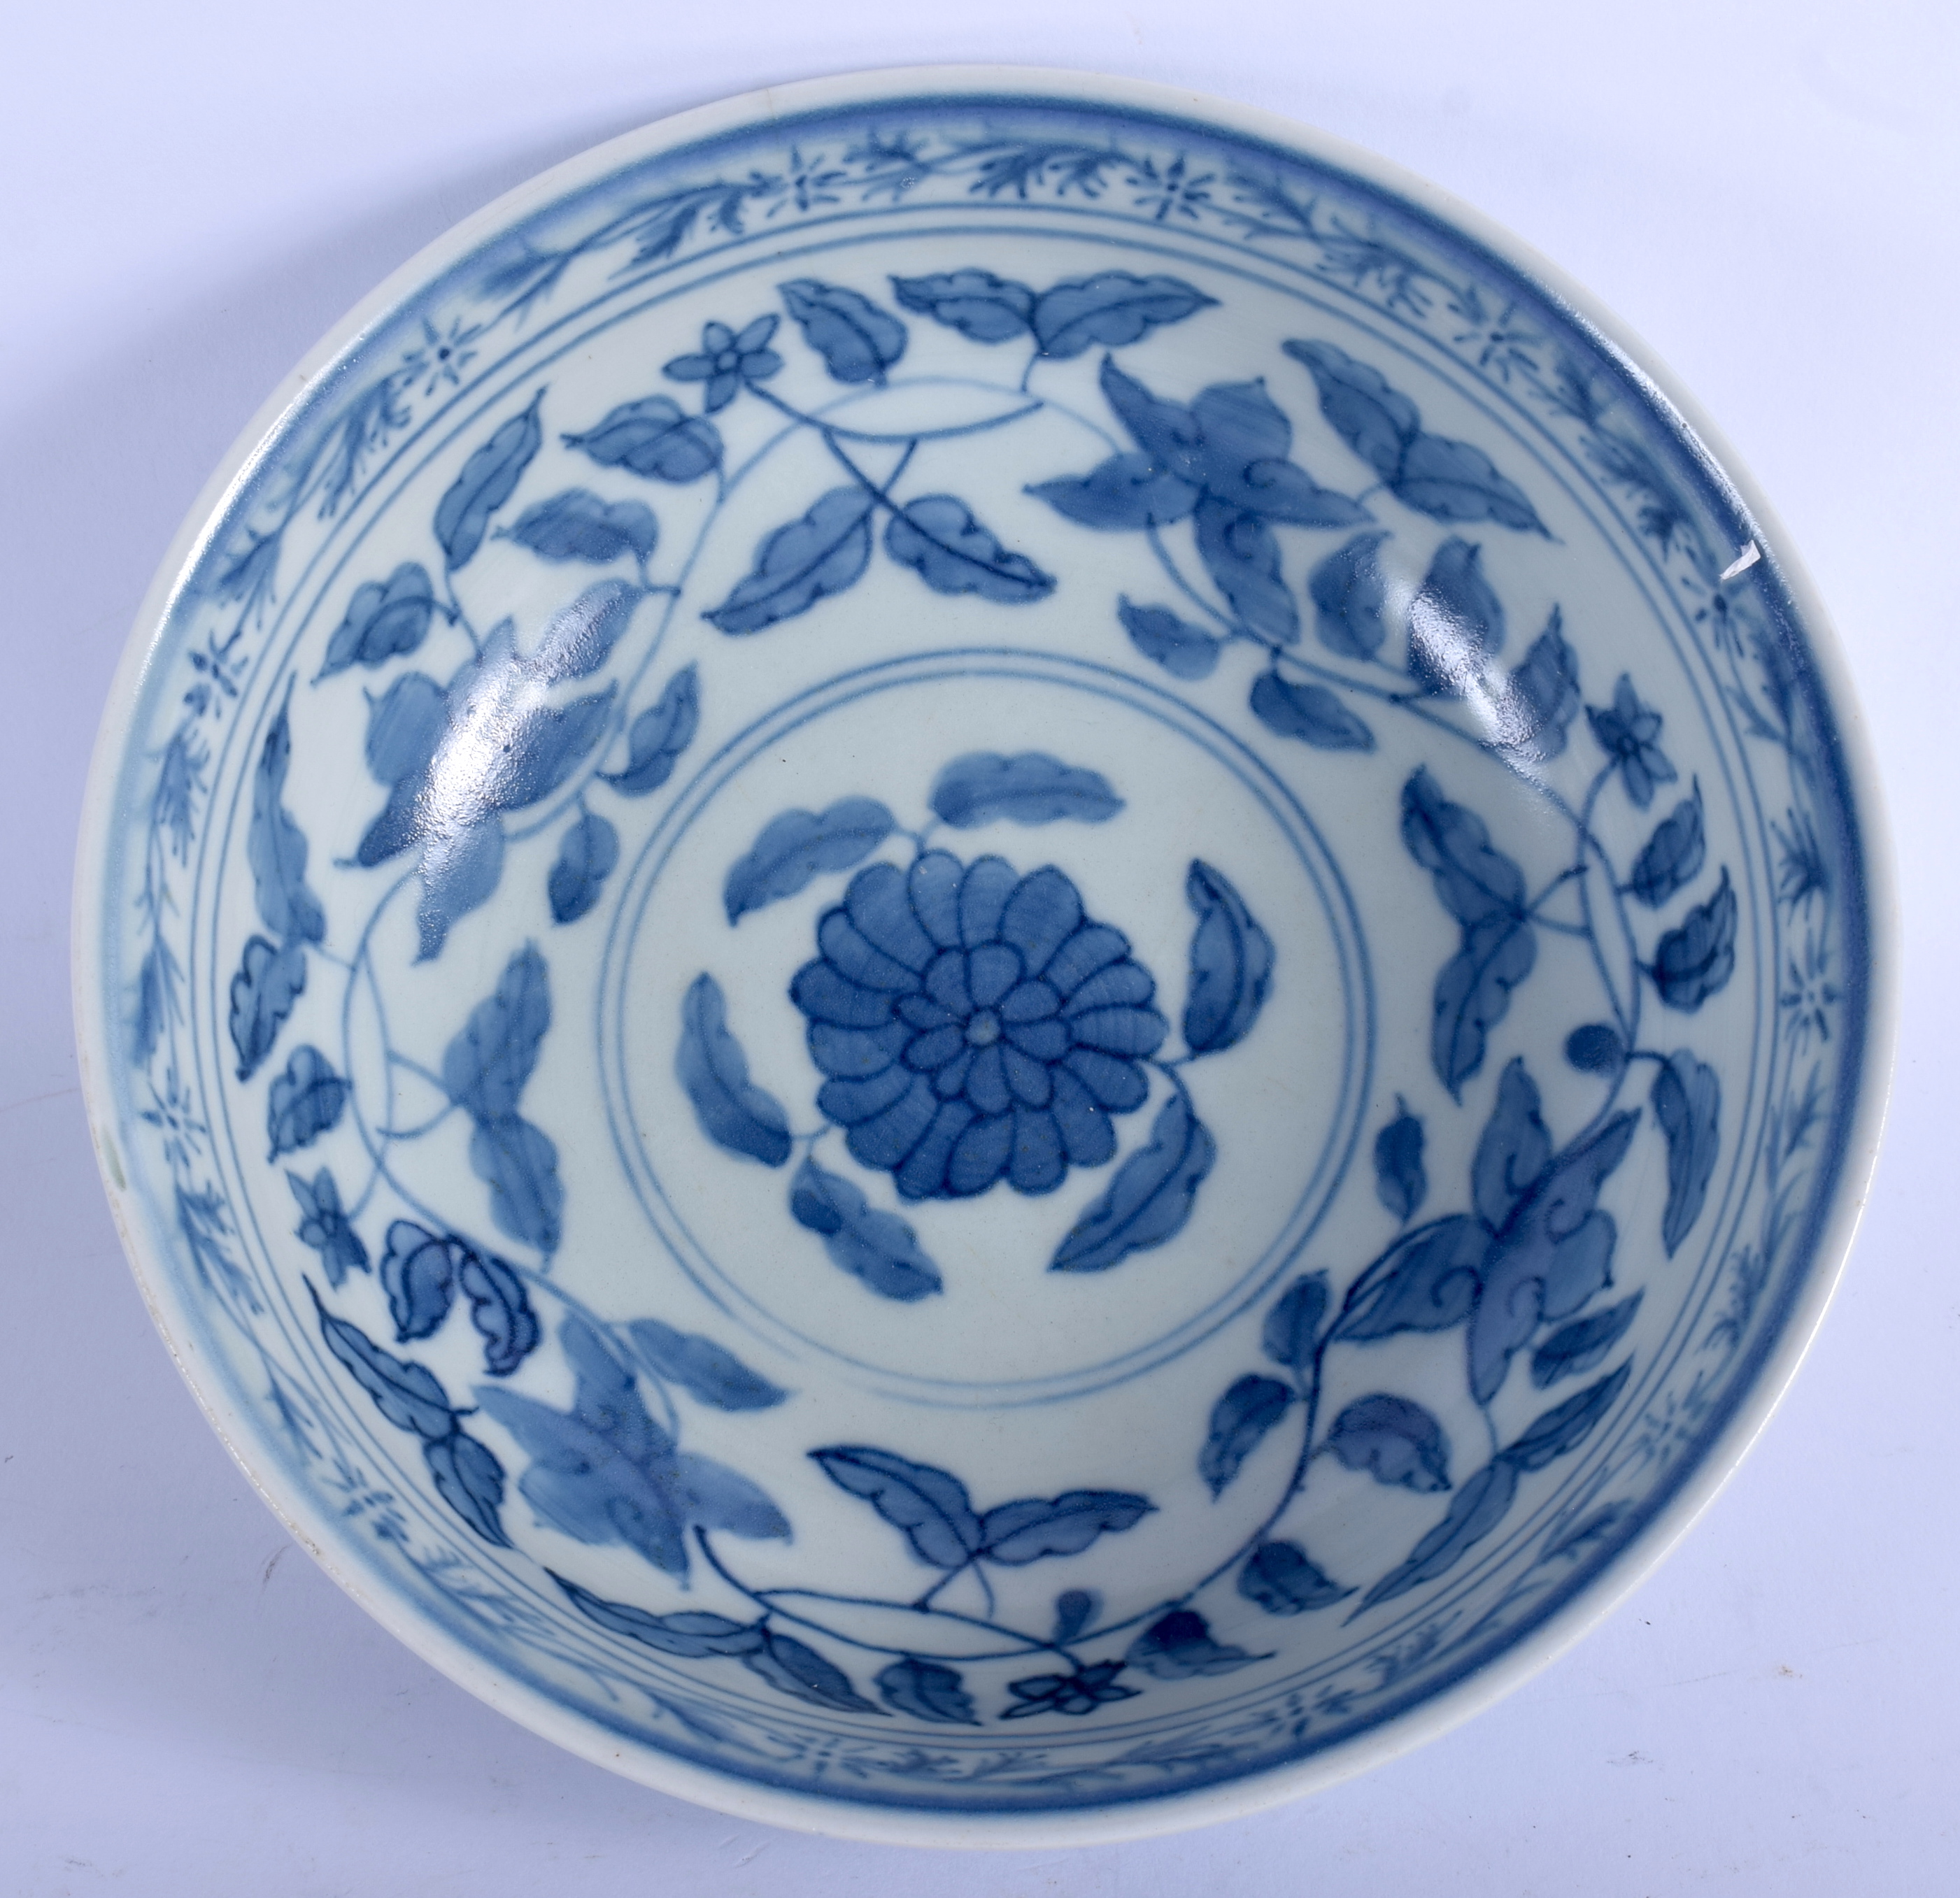 A CHINESE BLUE AND WHITE PORCELAIN BOWL BEARING KANGXI MARKS. 17.5 cm wide. - Image 3 of 4